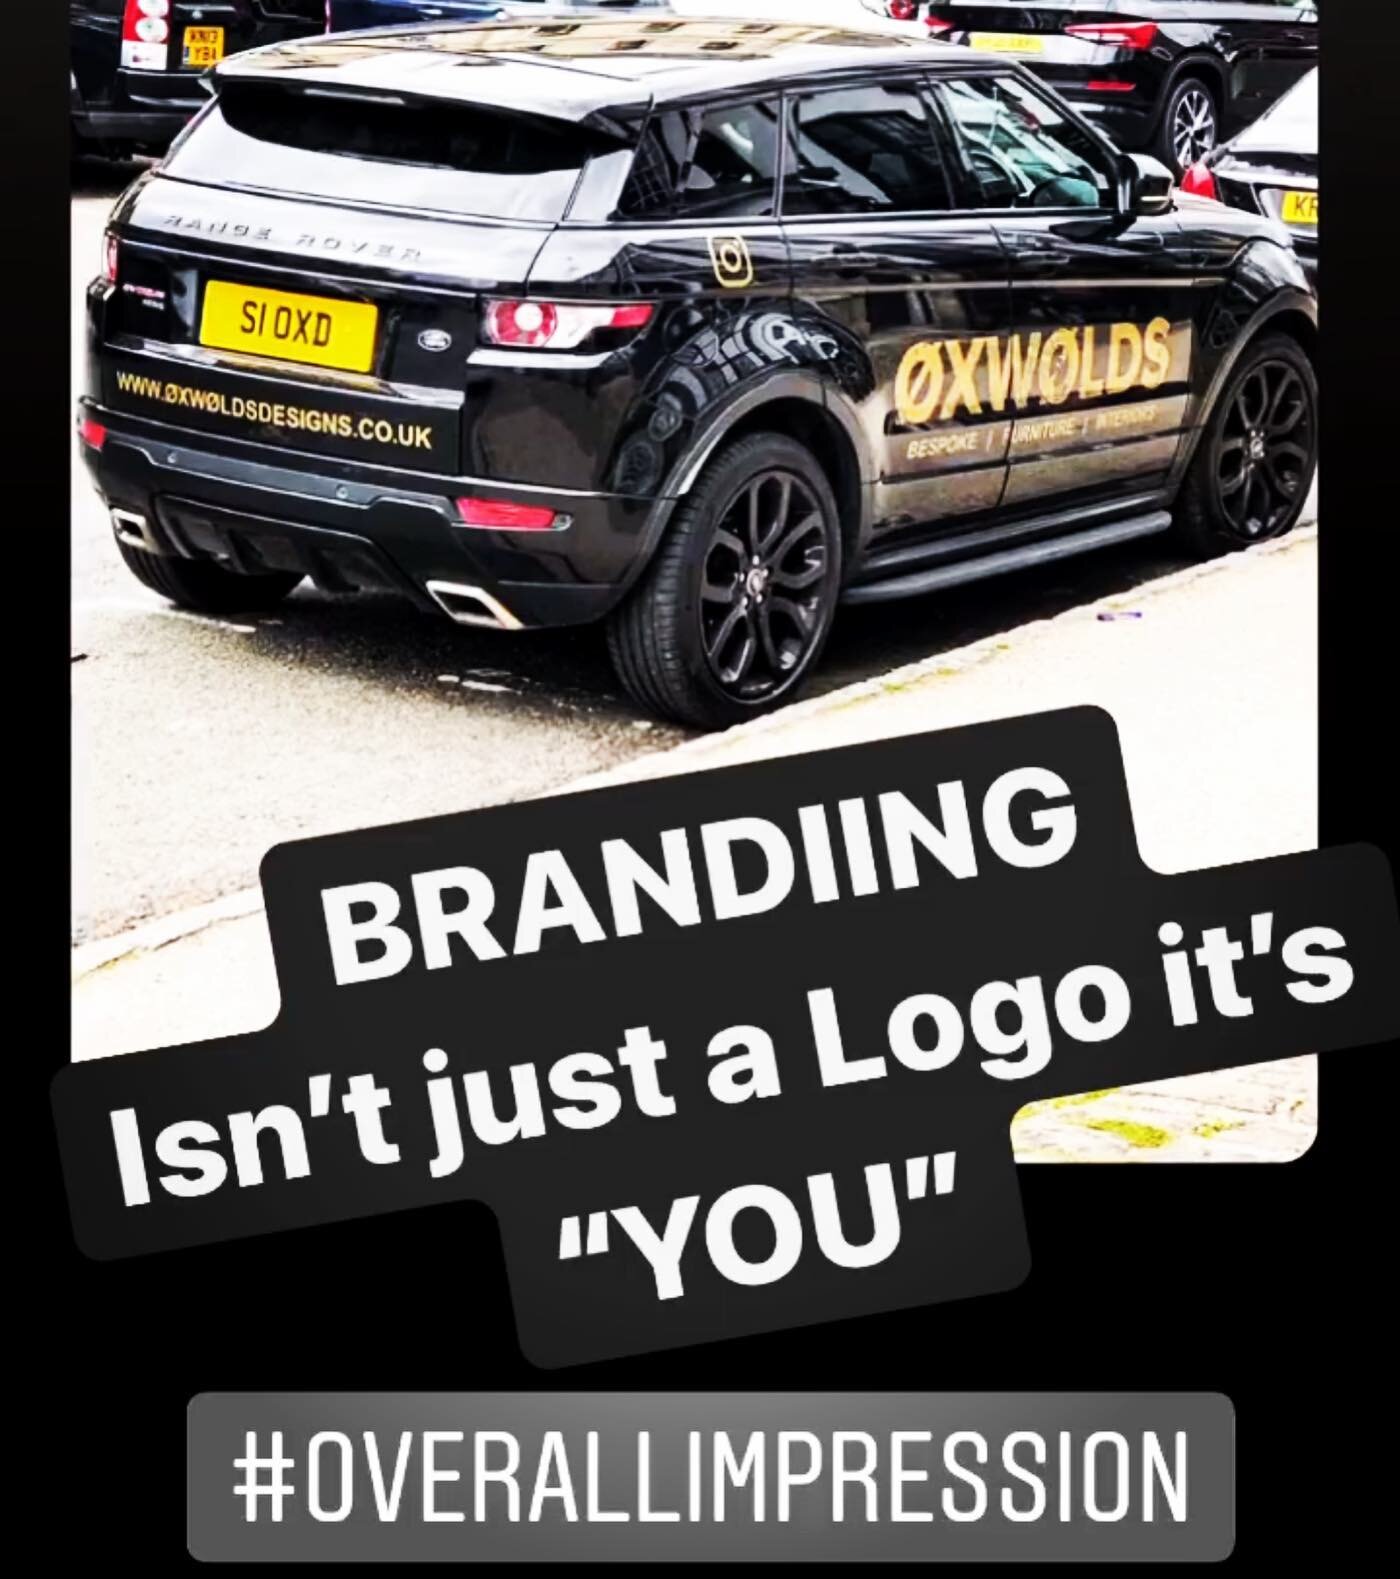 Branding represents &ldquo;YOU&rdquo; 
It&rsquo;s the single most important investment you can make in your business&hellip;.who you are, what you do, why you do it and how you do it&hellip;&hellip;✨💫👌

#branding #smallbusinessowner #mydesigns #bes